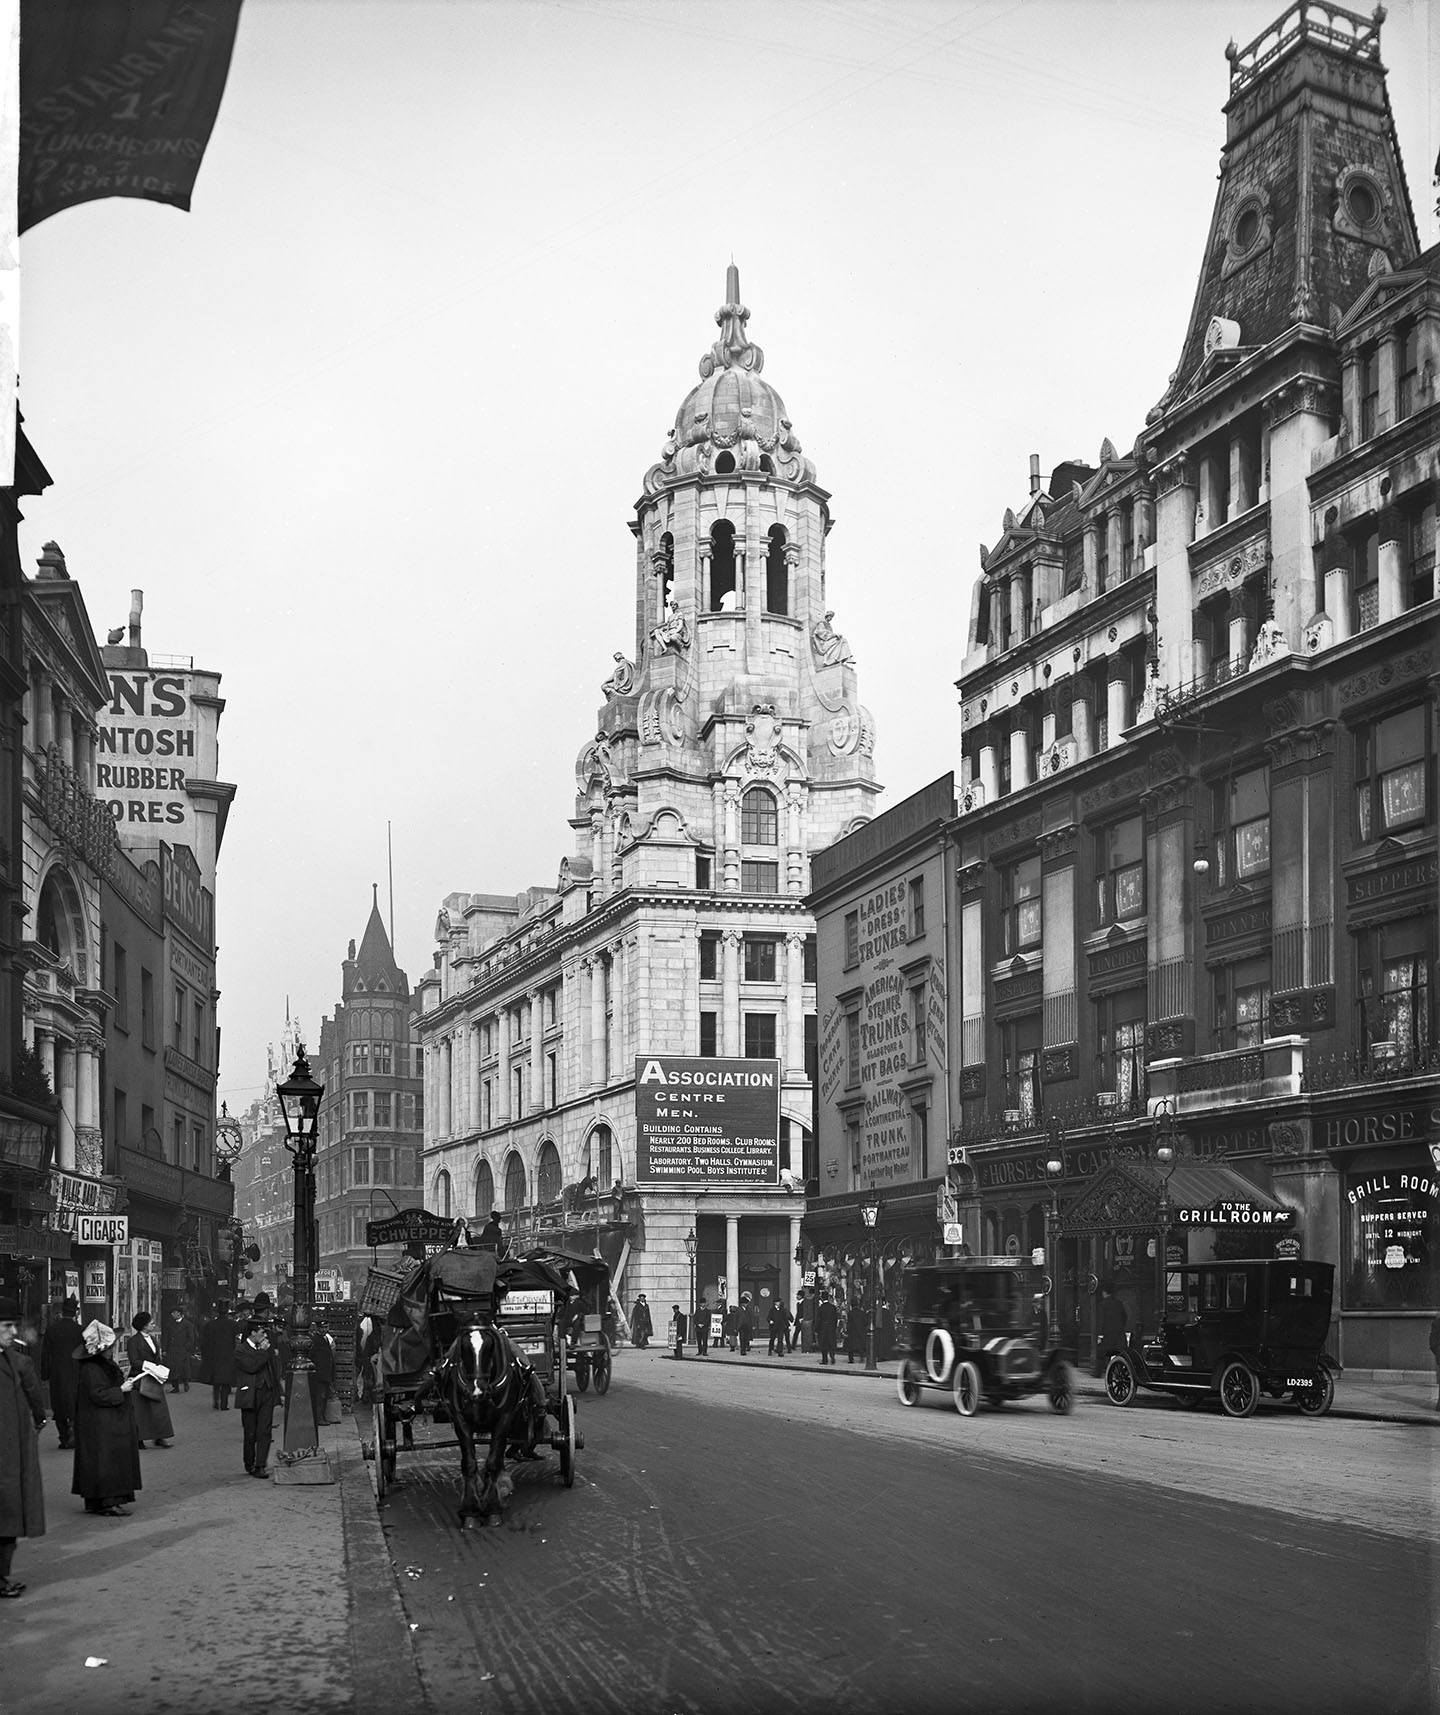 Black and white photo of a street with horses pulling carriages